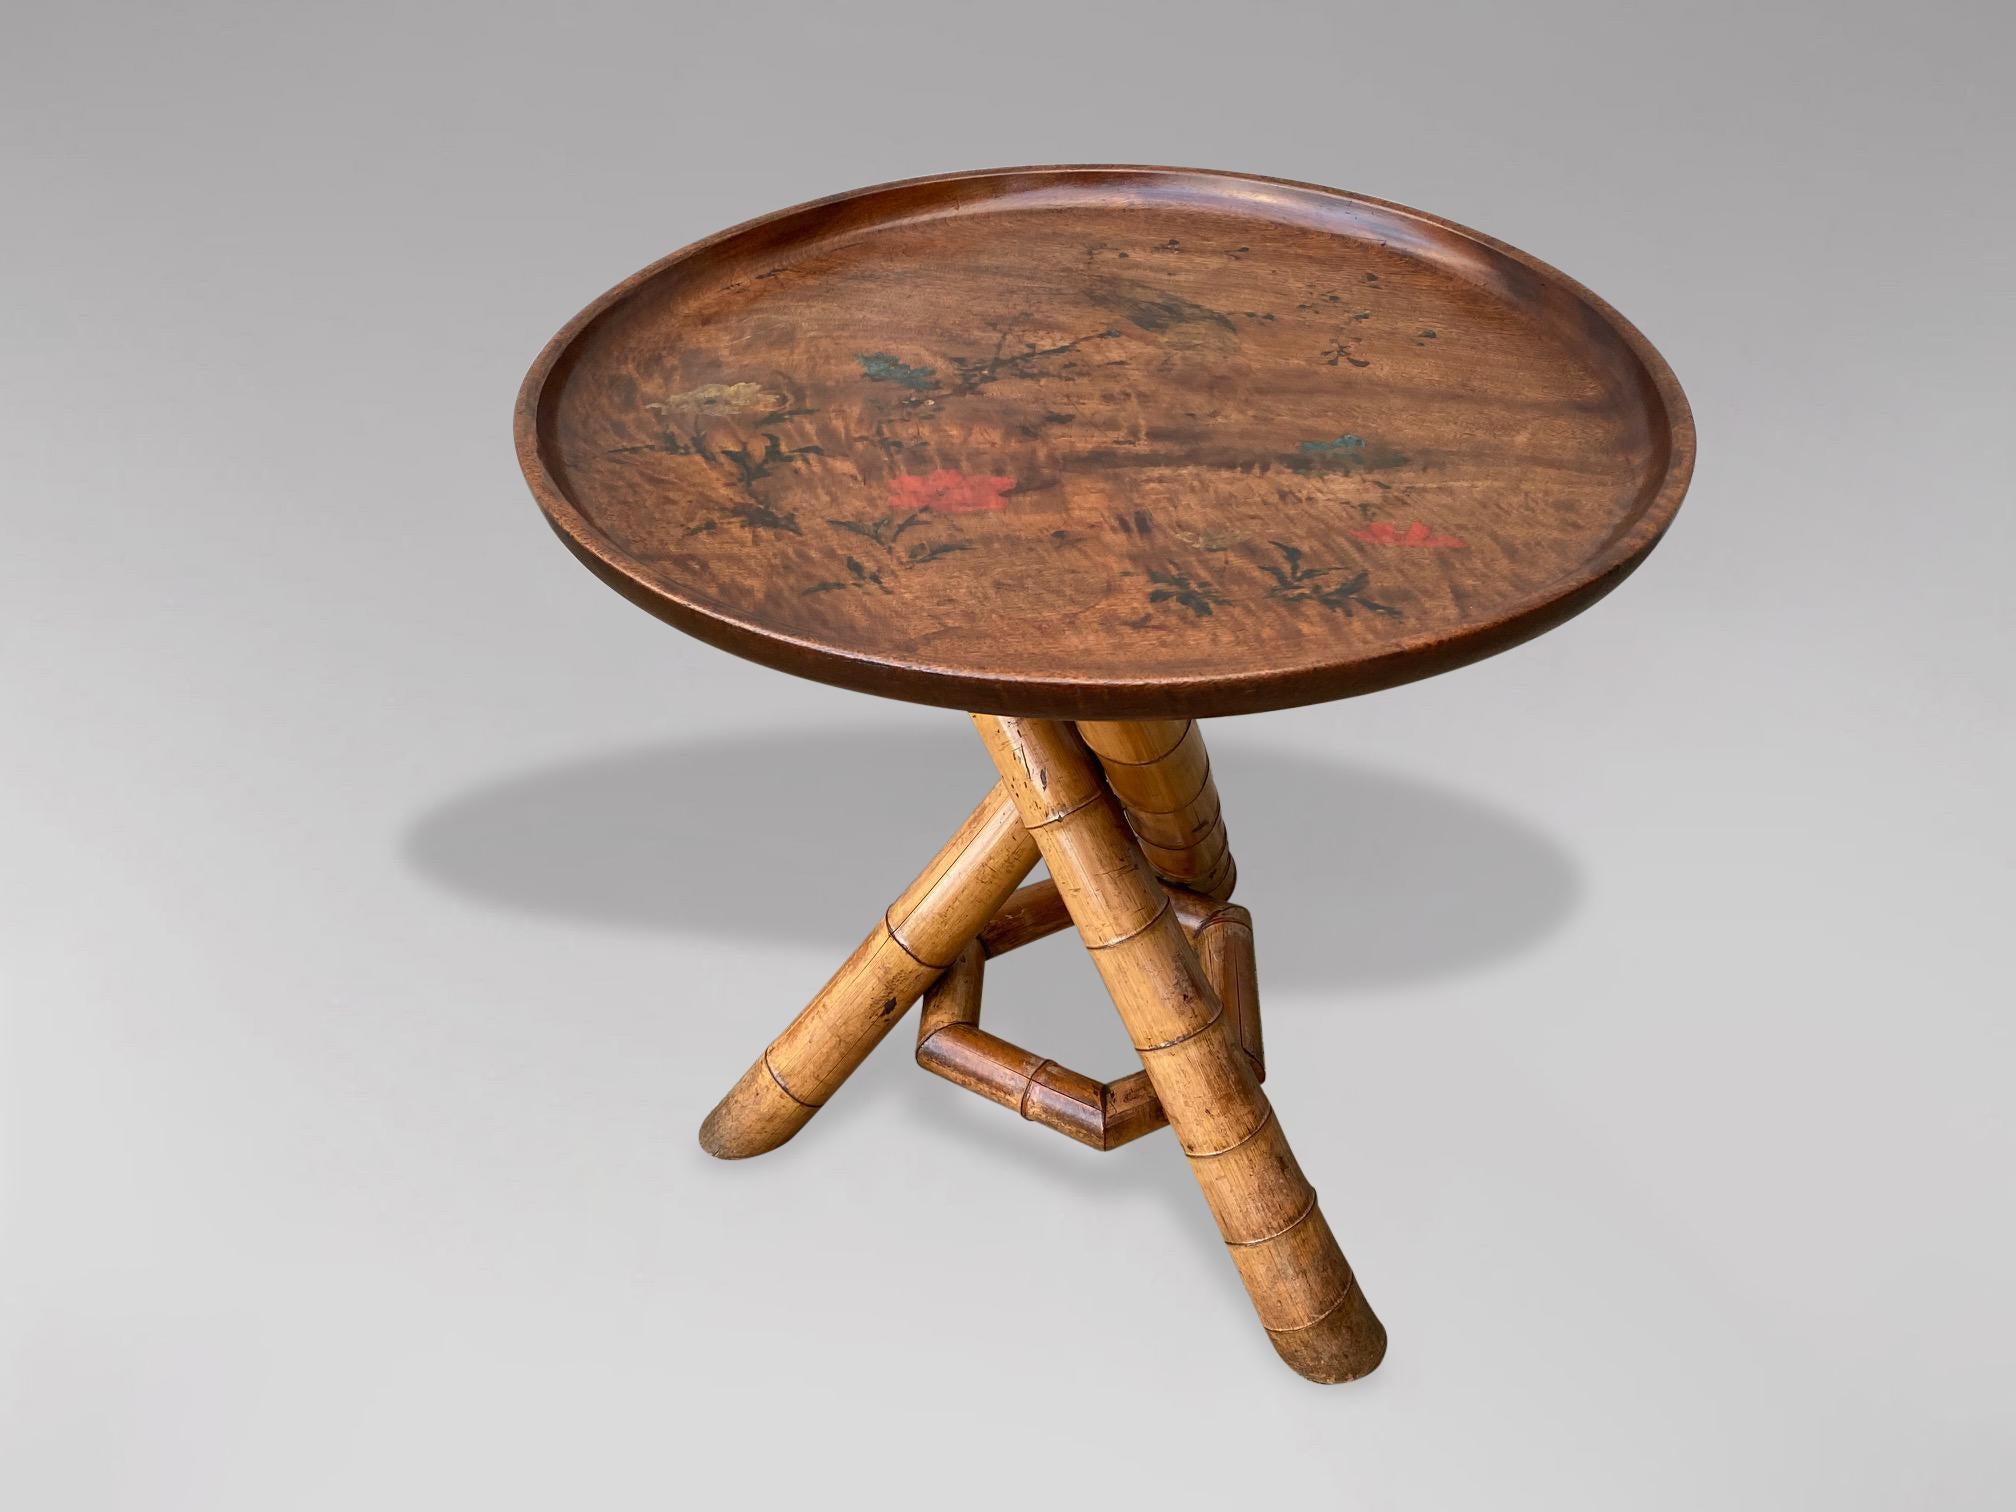 A large 19th century Victorian period Colonial bamboo circular occasional table. A circular dish top in hardwood with beautifully hand painted decorations of a bird, flowers and foliage. Above a bamboo tripod base with twisted leg formation united